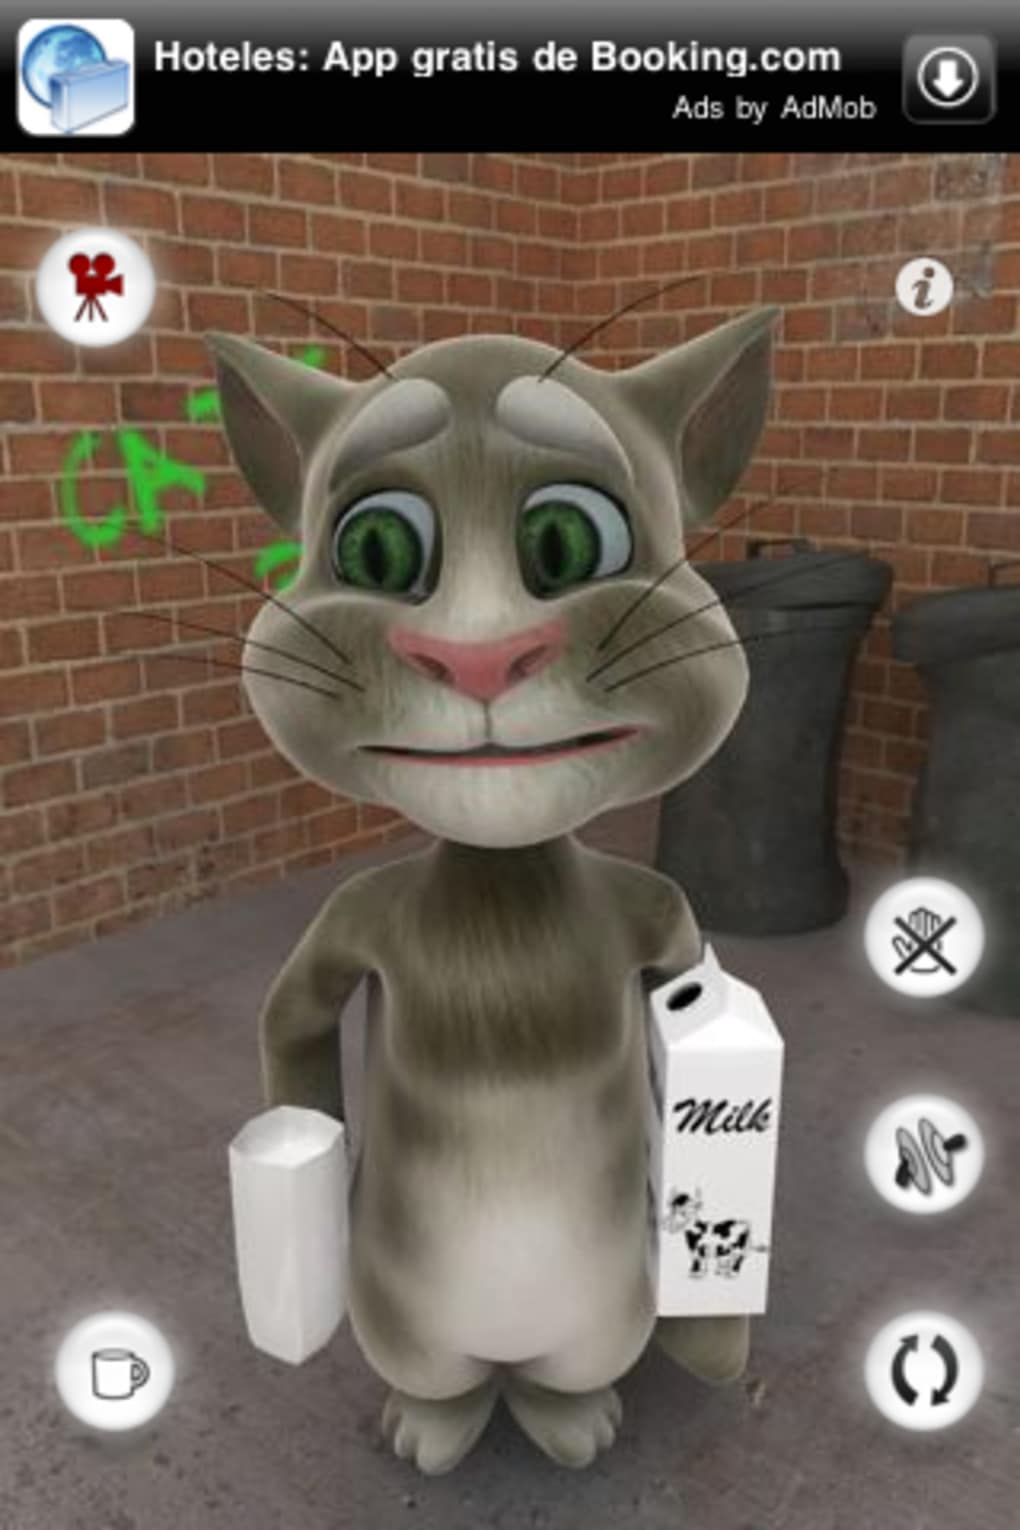 free Catsxp 3.12.1 for iphone download